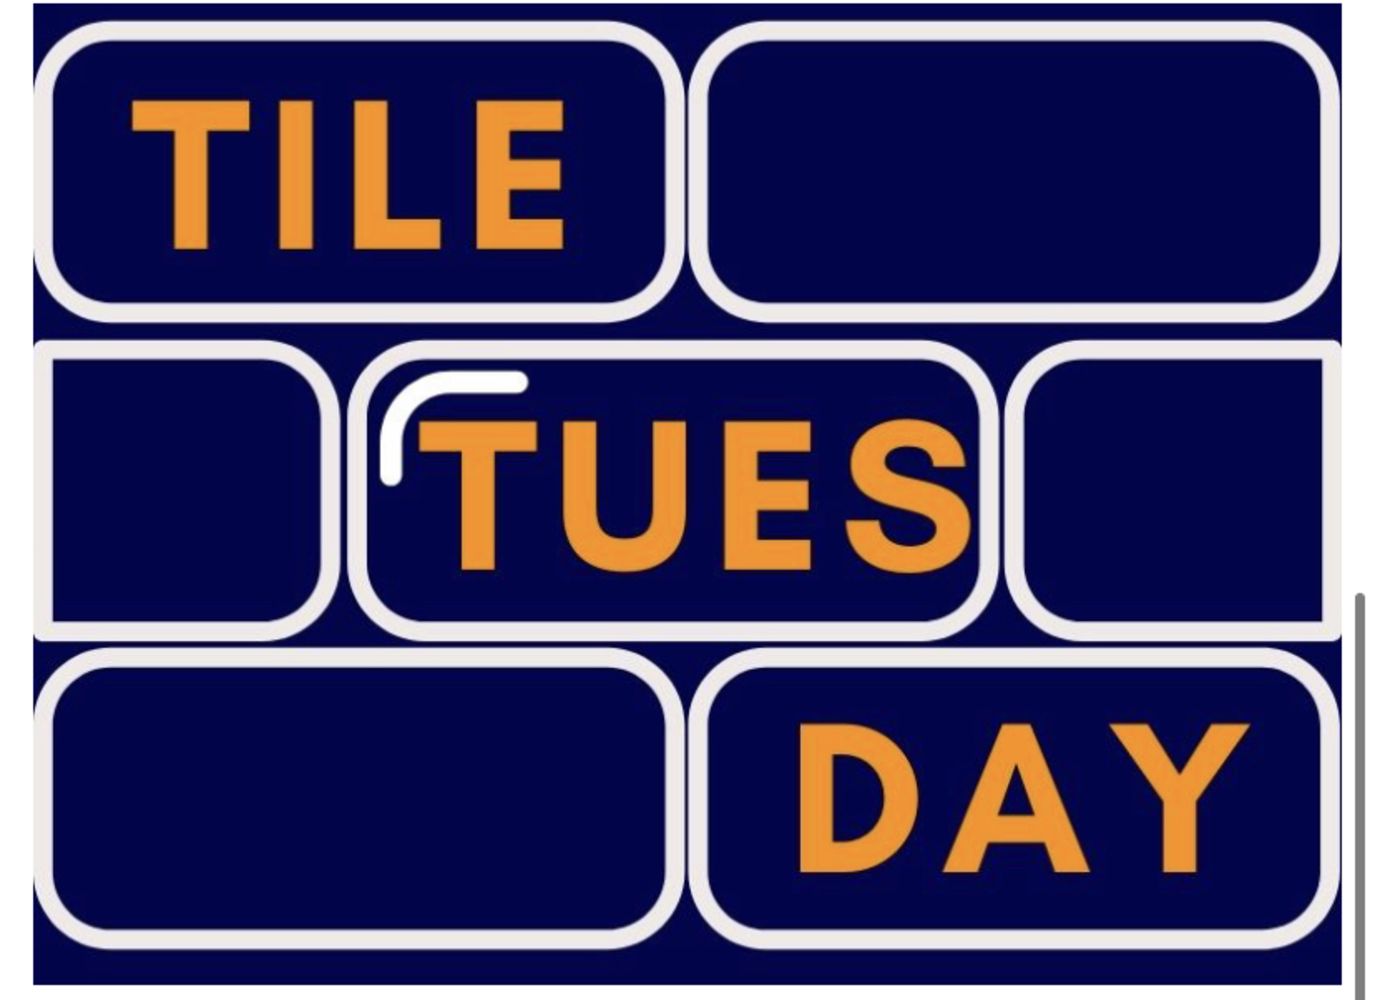 No Reserve - Tile Tuesday - “over £80k worth of tiles – Sourced from Johnsons Tiles” - 18th May 2021